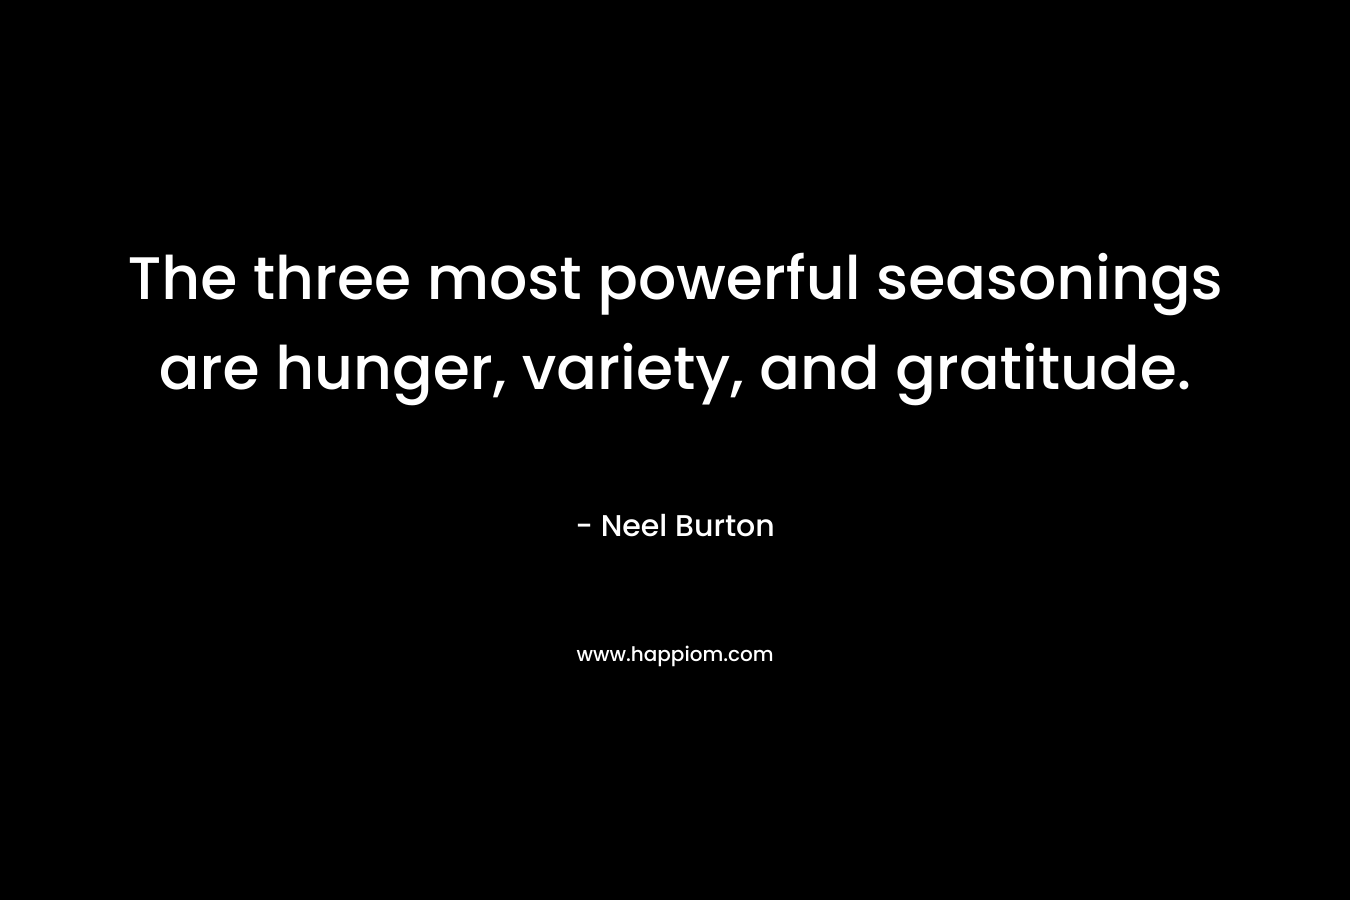 The three most powerful seasonings are hunger, variety, and gratitude.